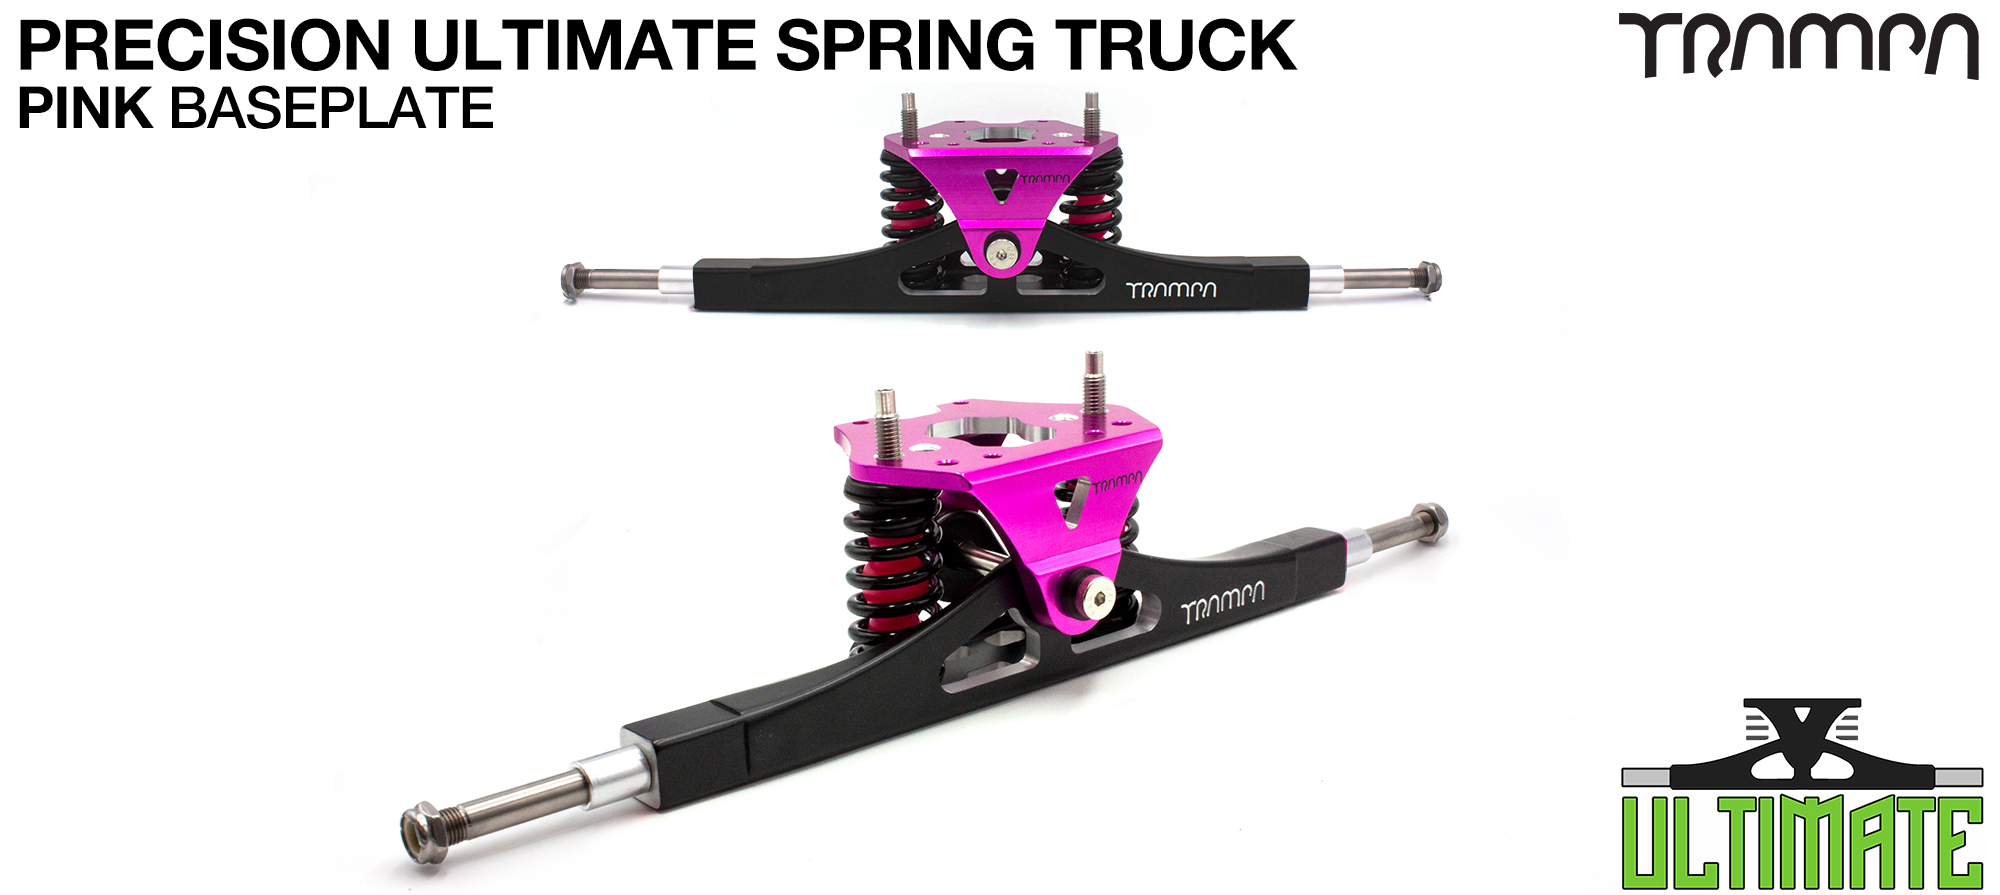 Precision CNC ULTIMATE ATB TRUCK with CNC Motor Mount fixing points, PINK Baseplate, TITANIUM Axles & Kingpin 